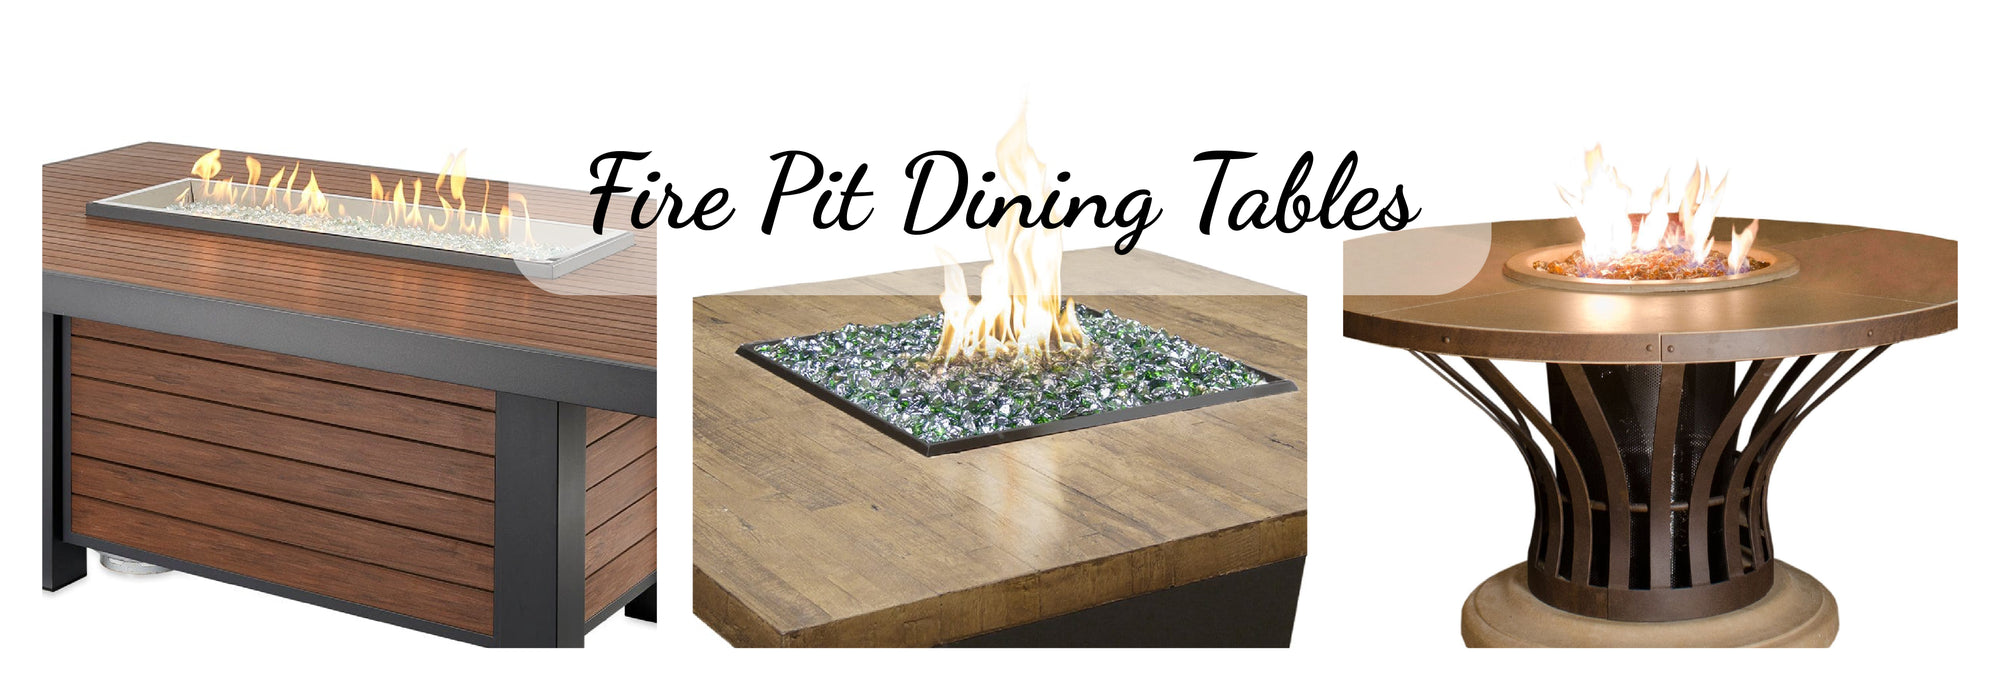 Fire Pit Dining Tables